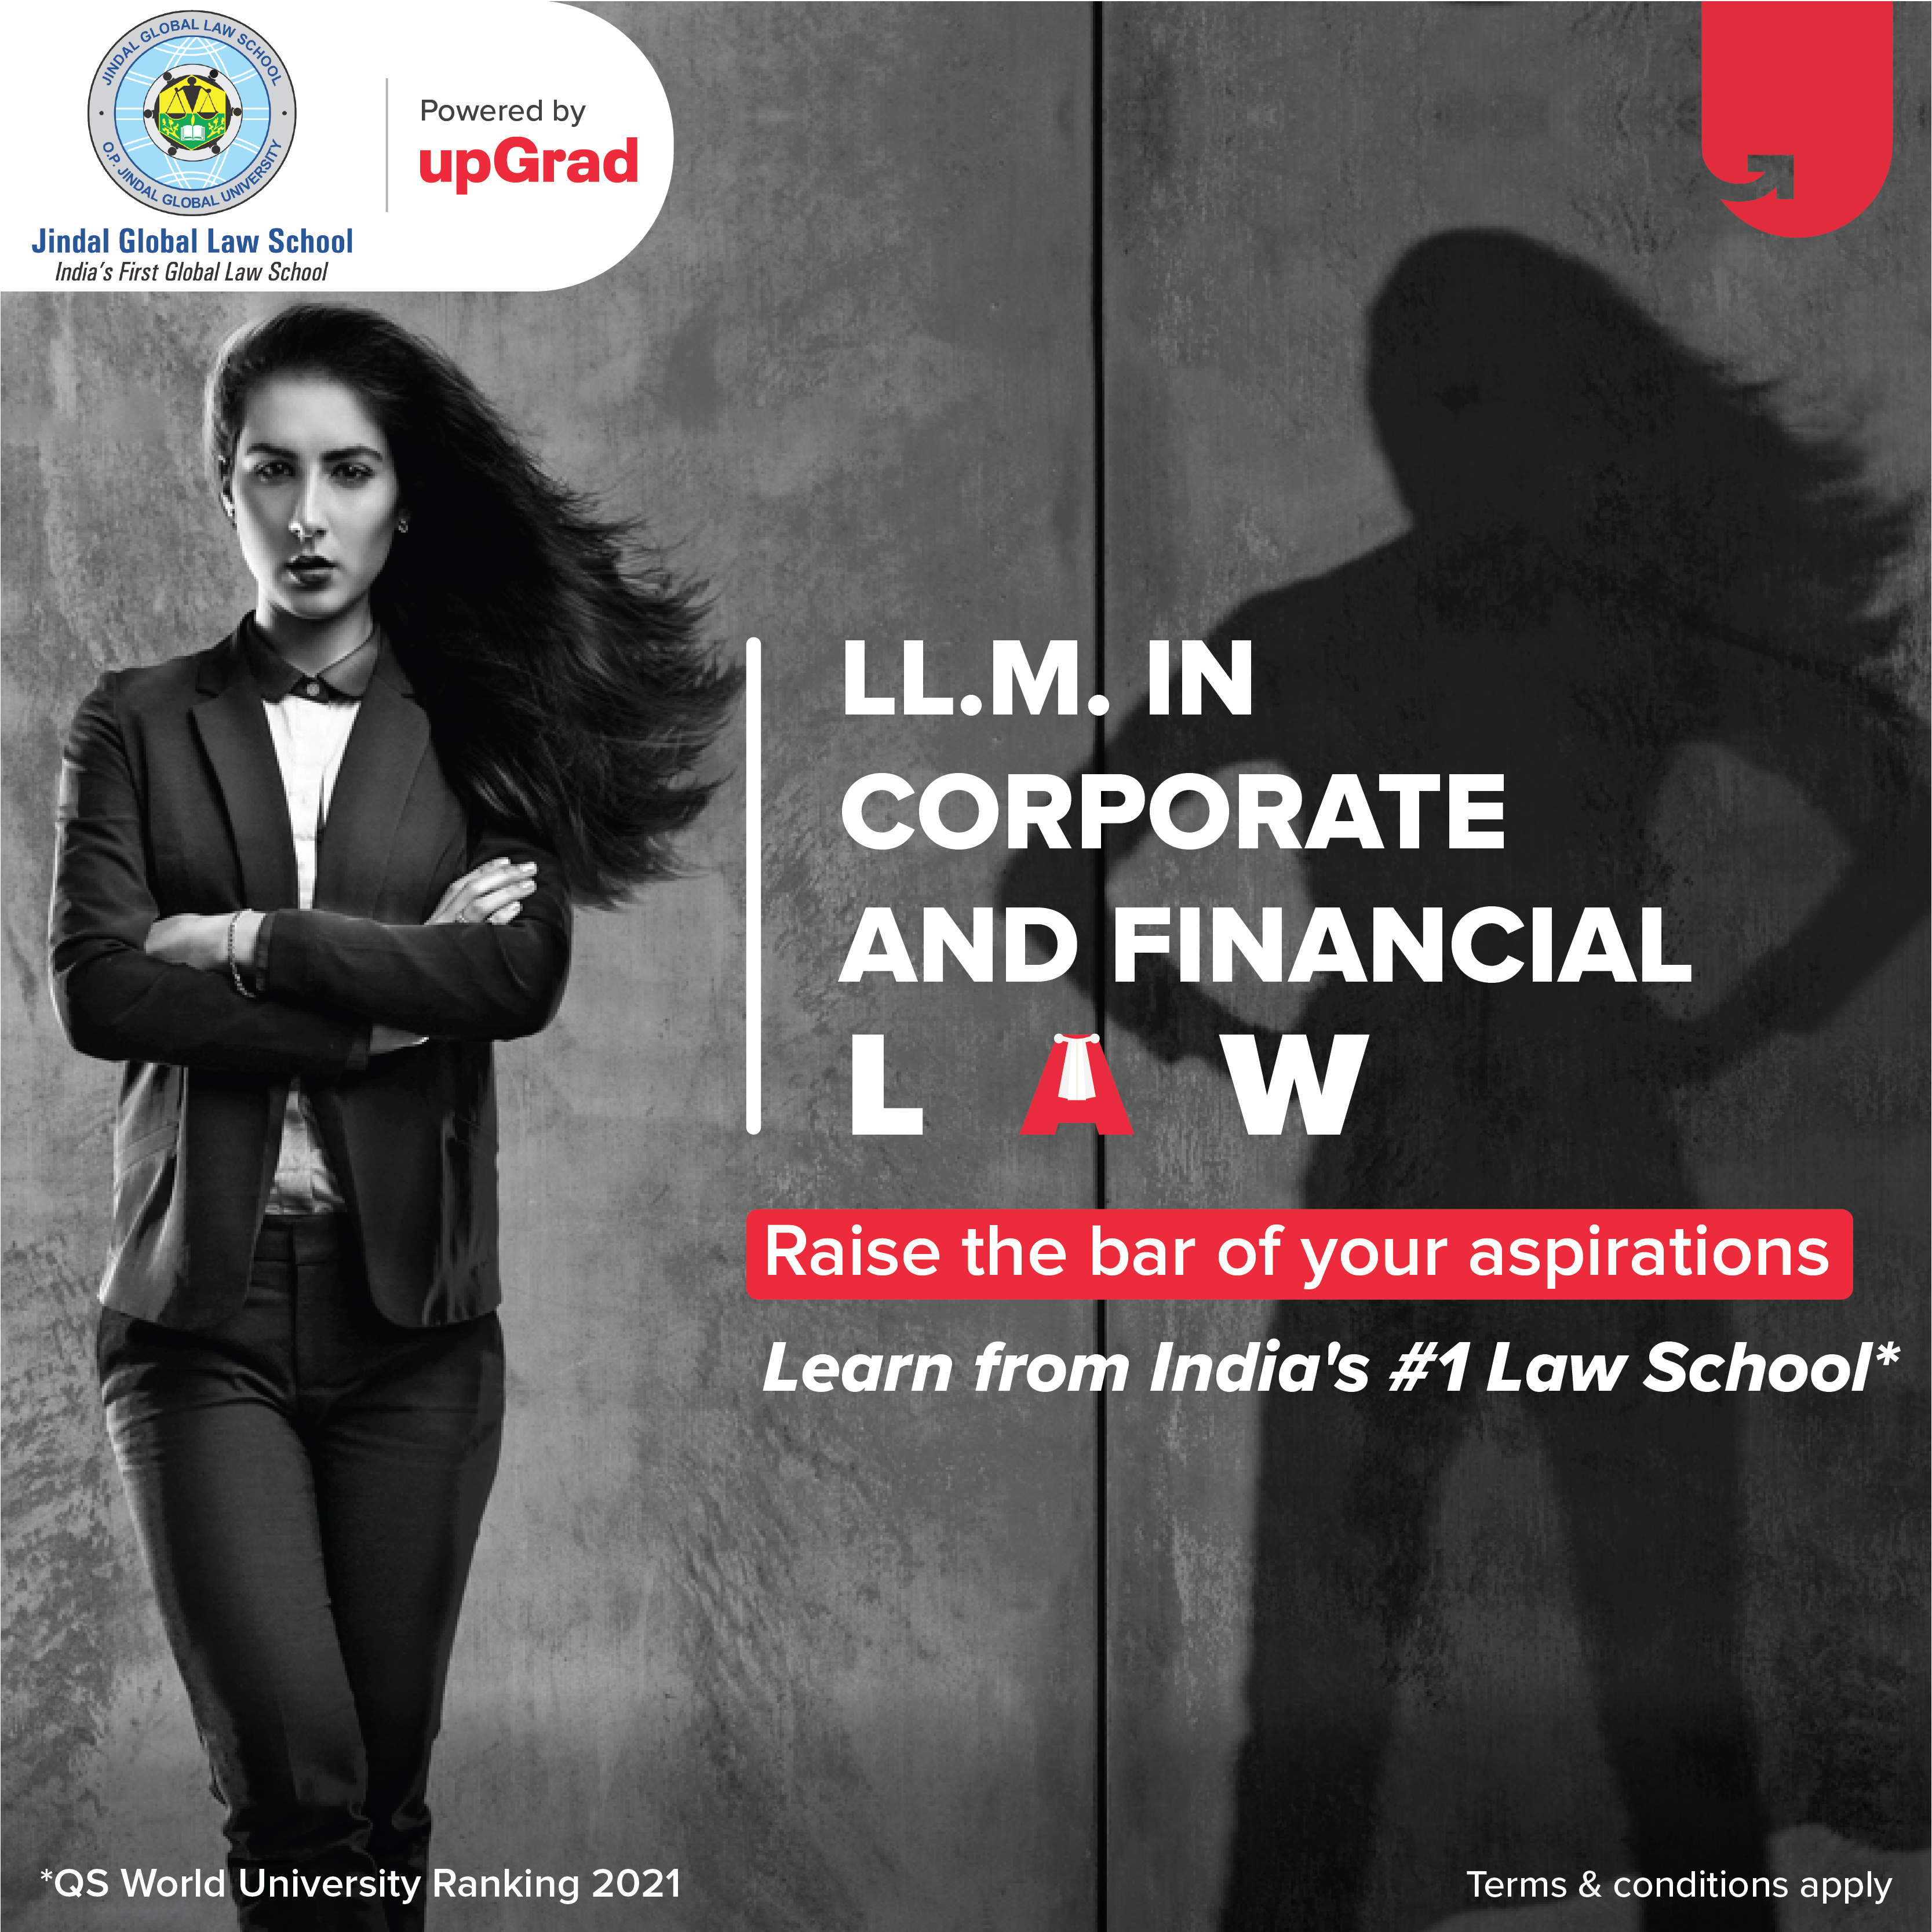 Jindal Global Law Schools World-Class Faculty & Industry Experts Present the LL.M. In Corporate & Financial Law, Powered By upGrad